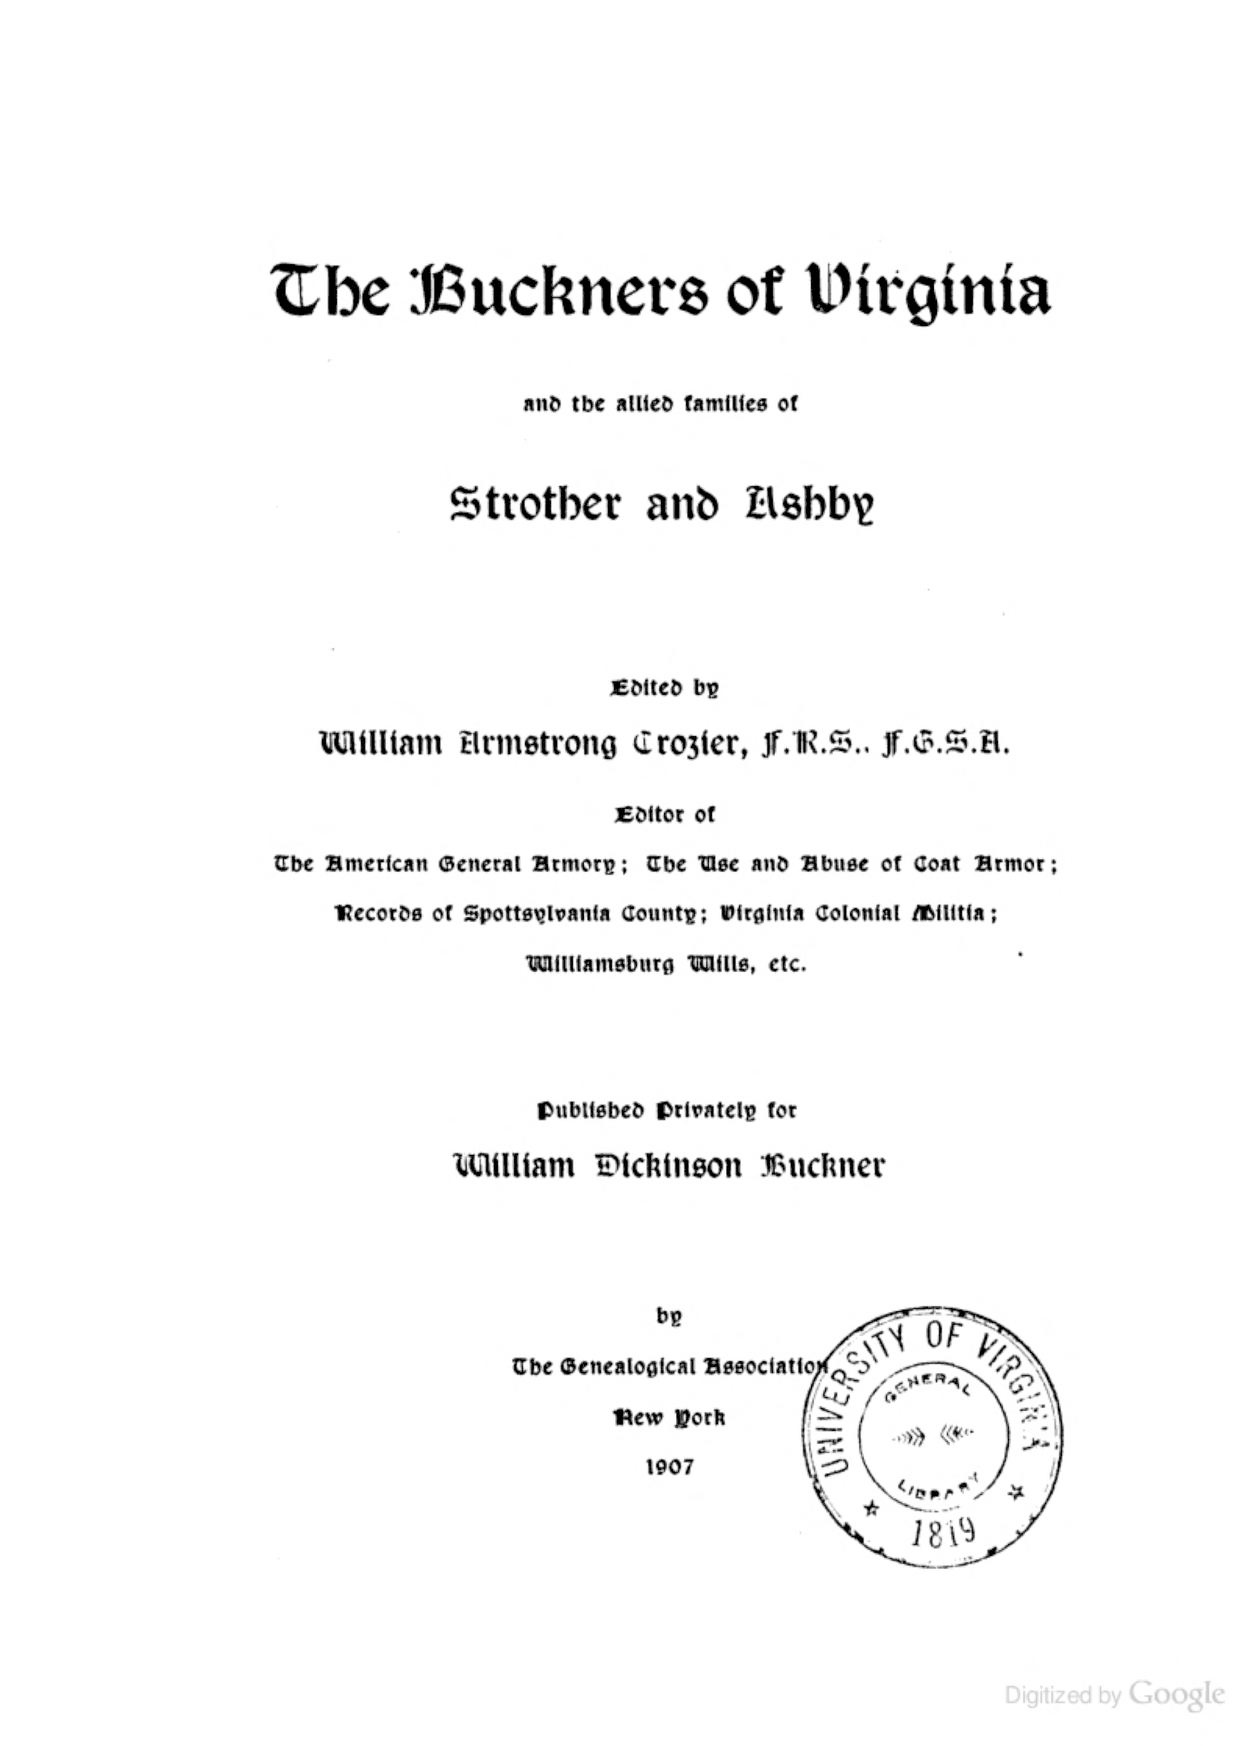 The Buckners of Virginia  and the allied families of Strother and Ashby